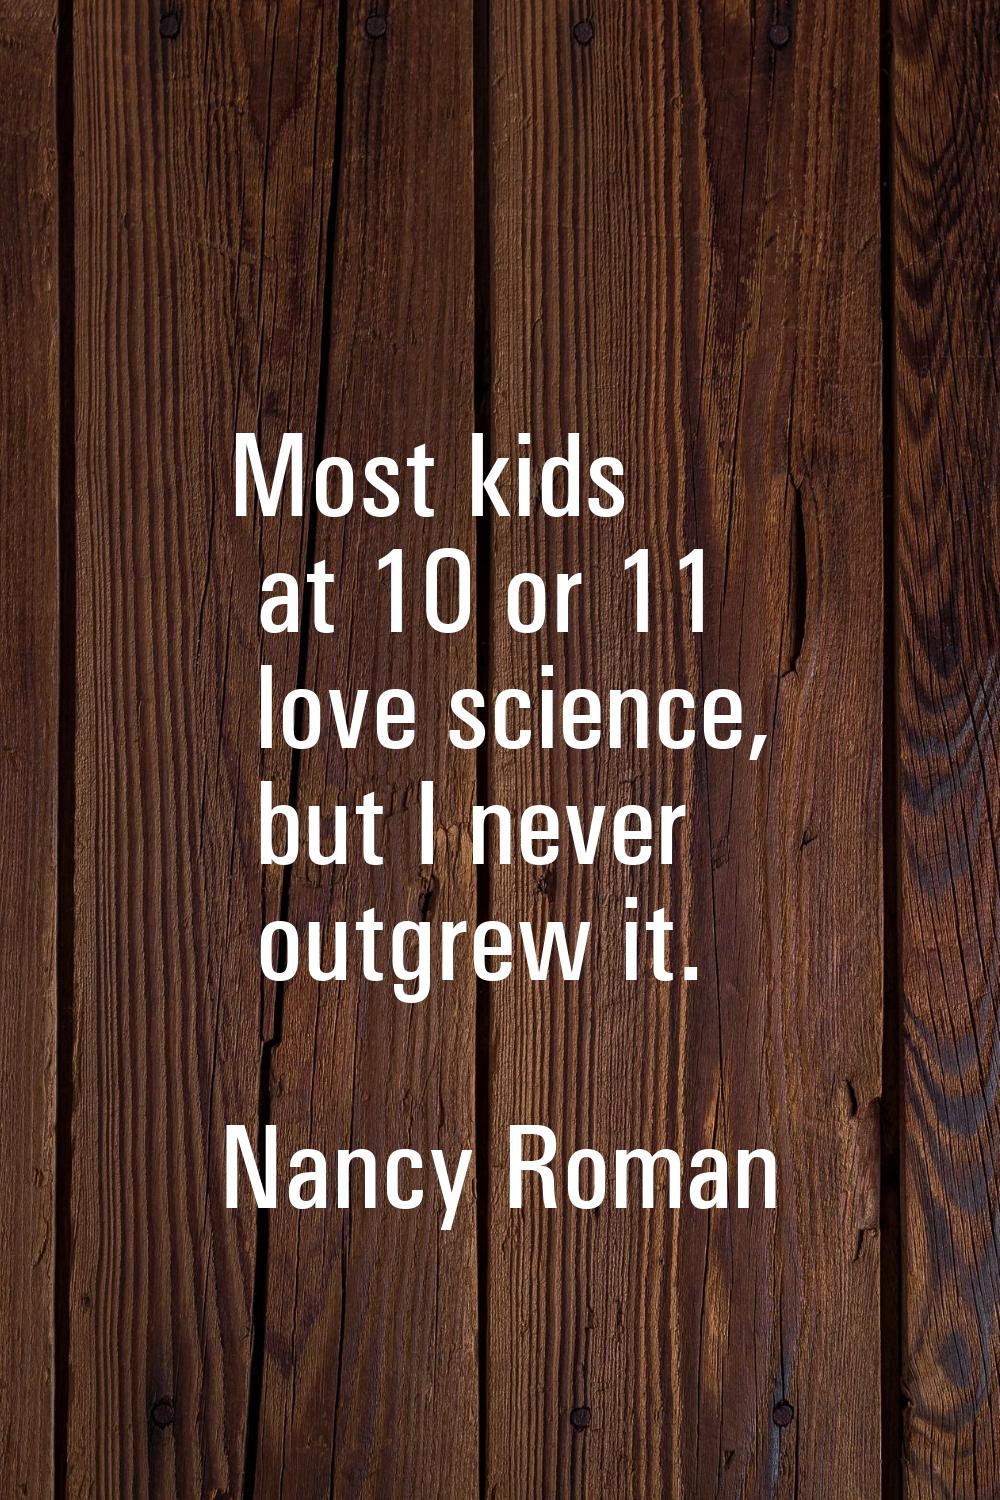 Most kids at 10 or 11 love science, but I never outgrew it.